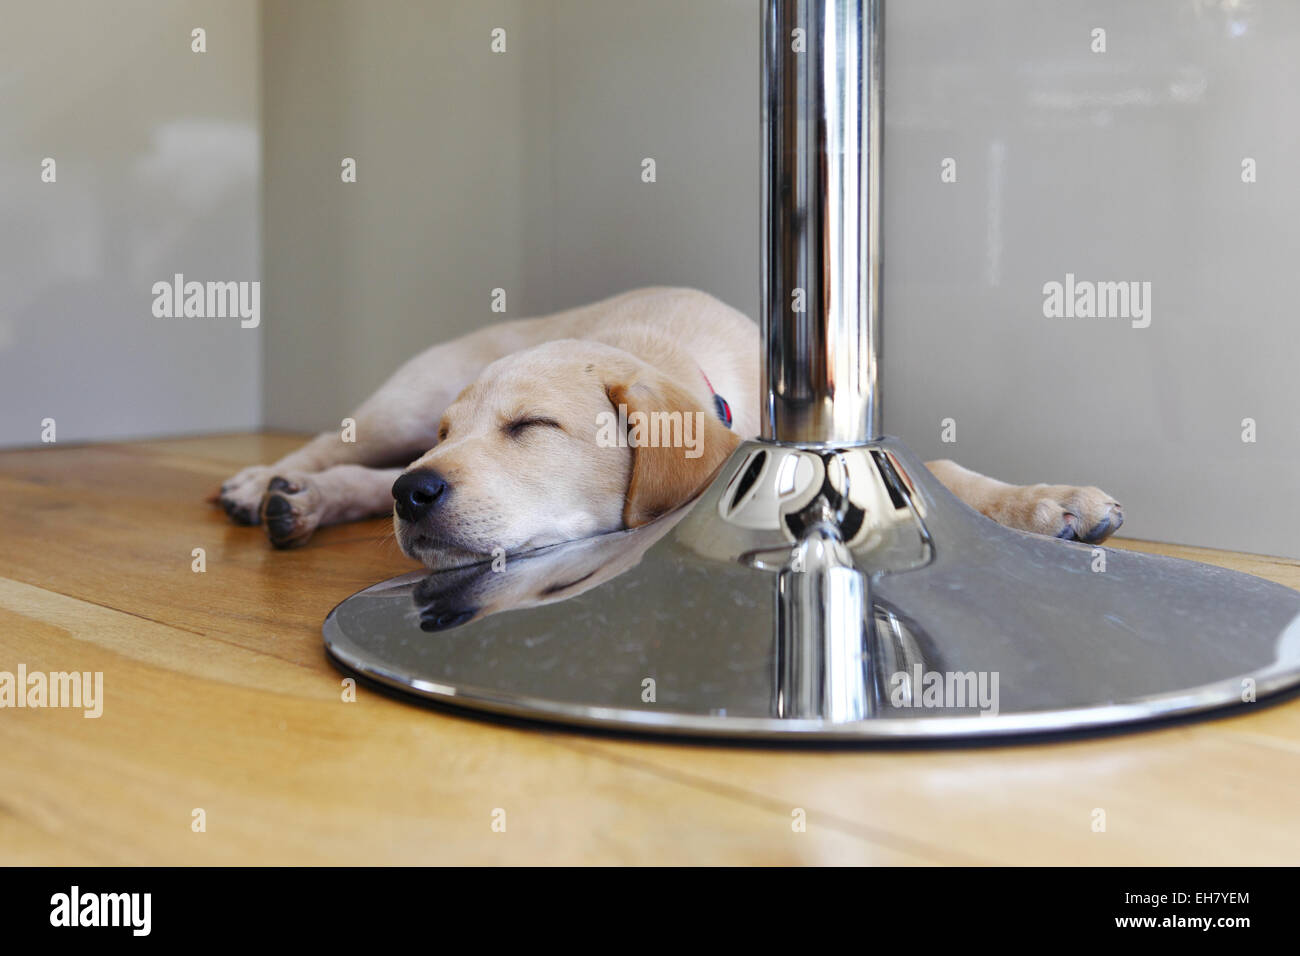 Yellow Labrador Retriever puppy aged 9 weeks old resting after exploring new home Stock Photo